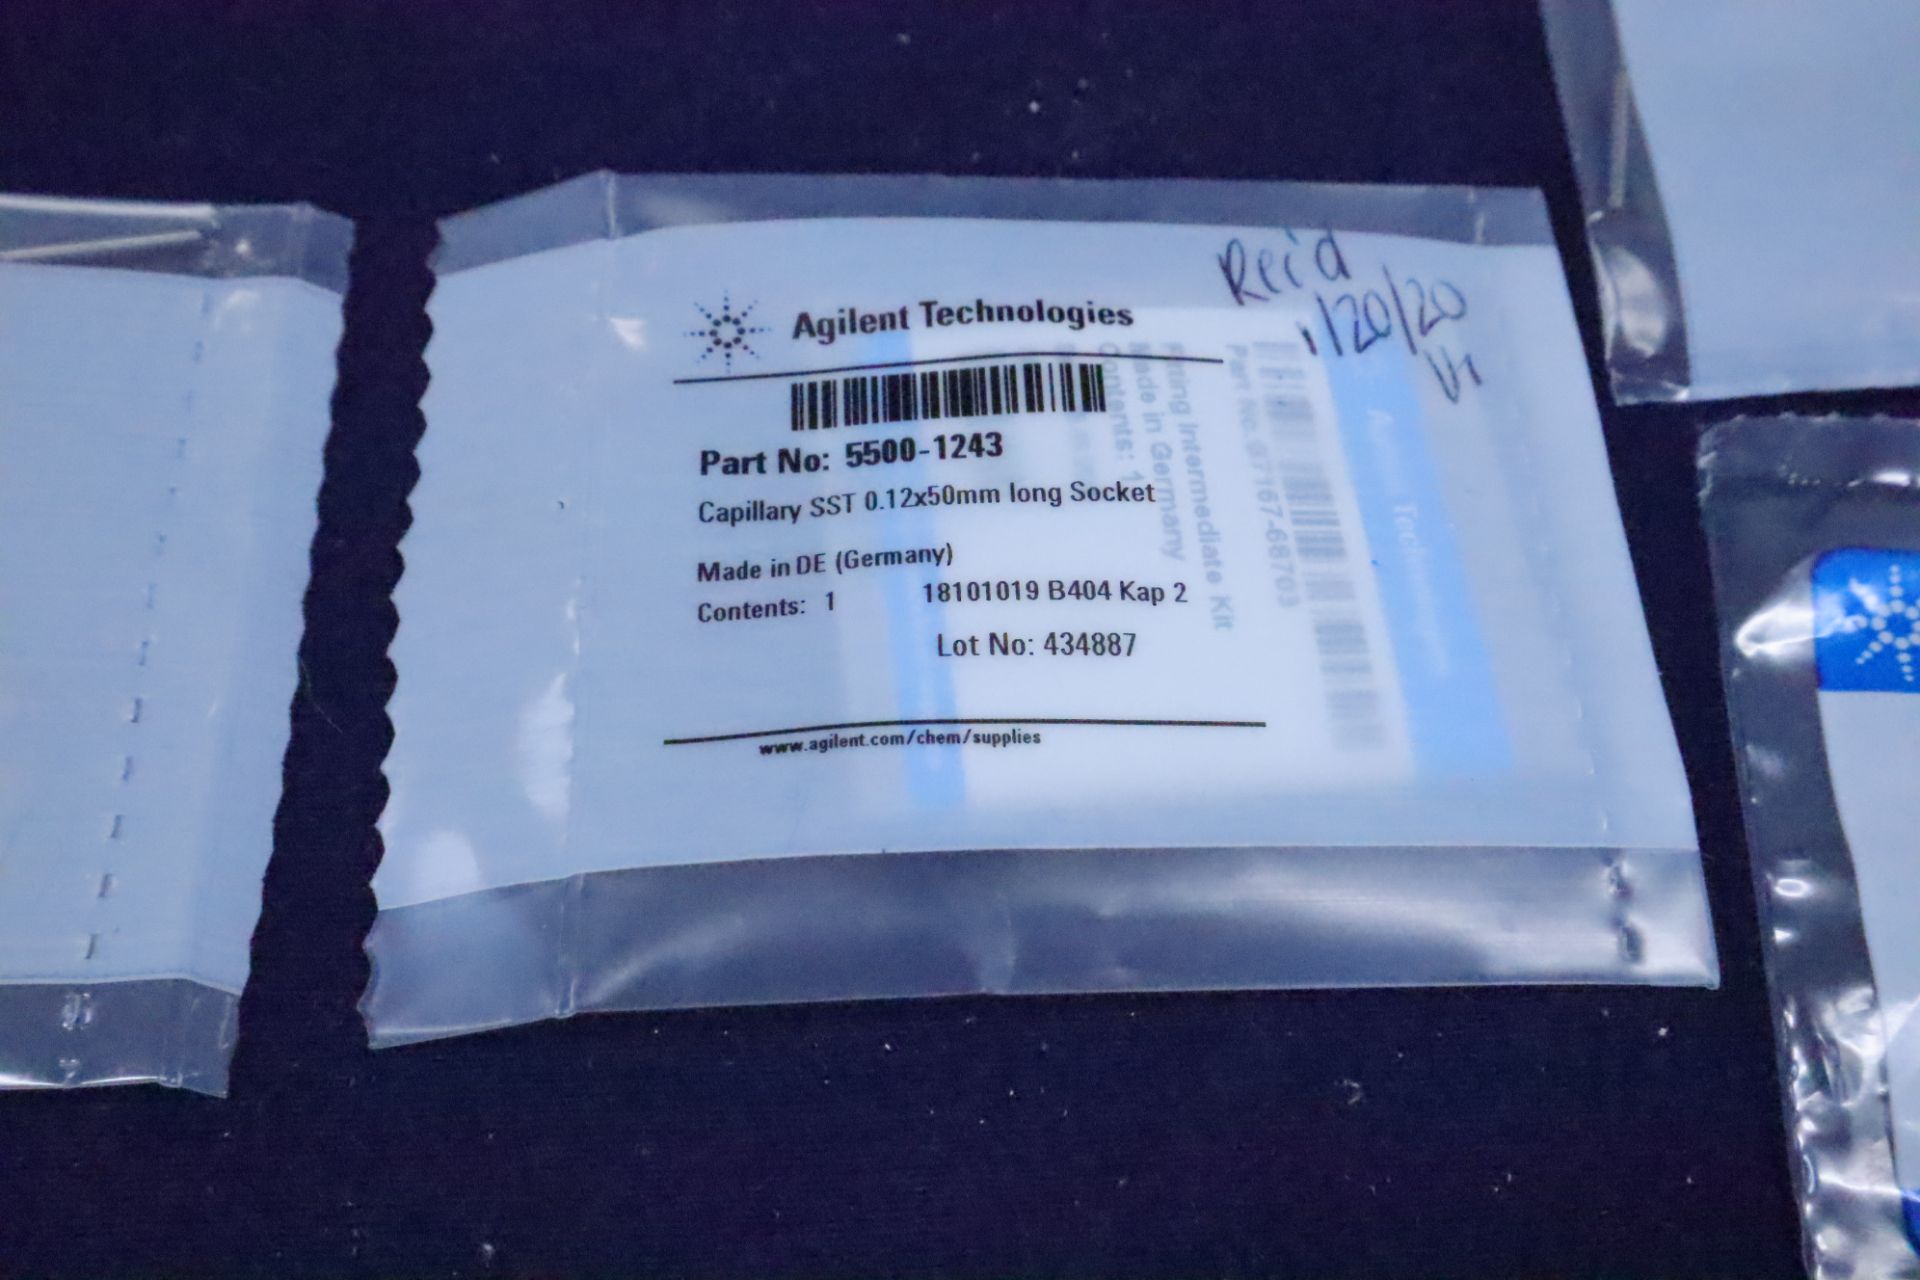 UPDATED PHOTOS Agilent Technologies OEM Replacement Parts and tool kits for LC/MS Machines - Image 18 of 37